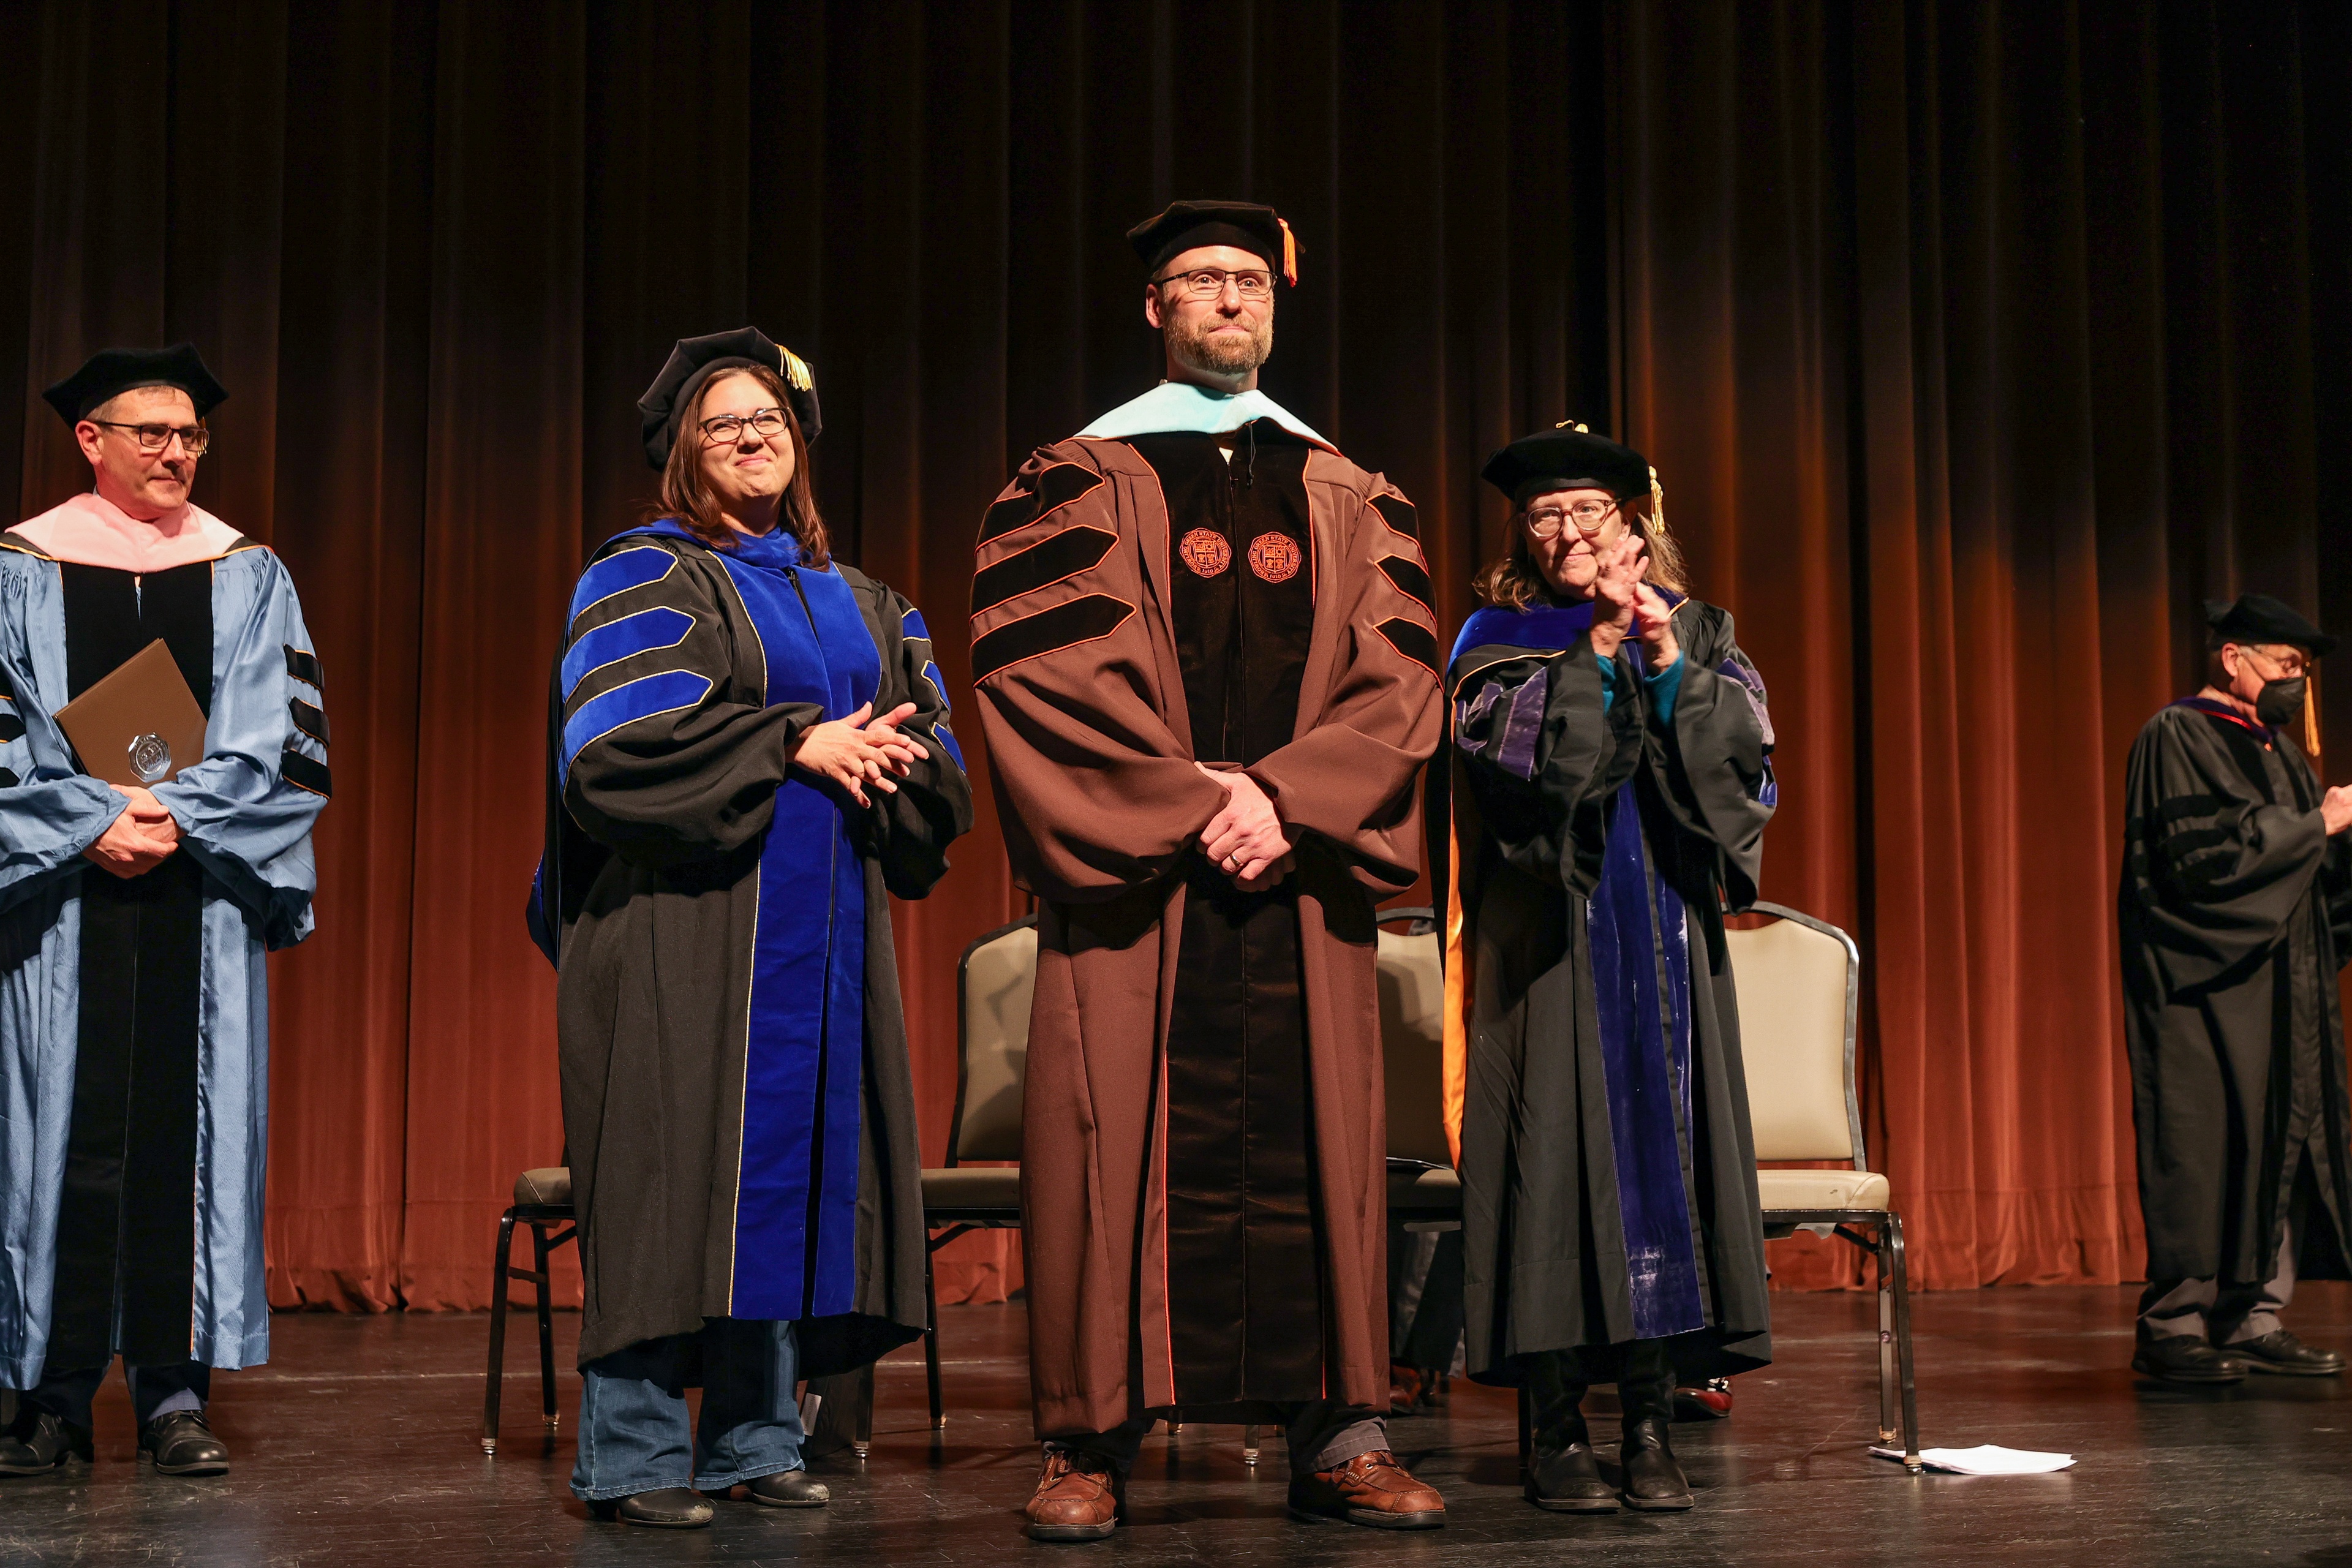 Doctoral candidate receives hood at hooding ceremony